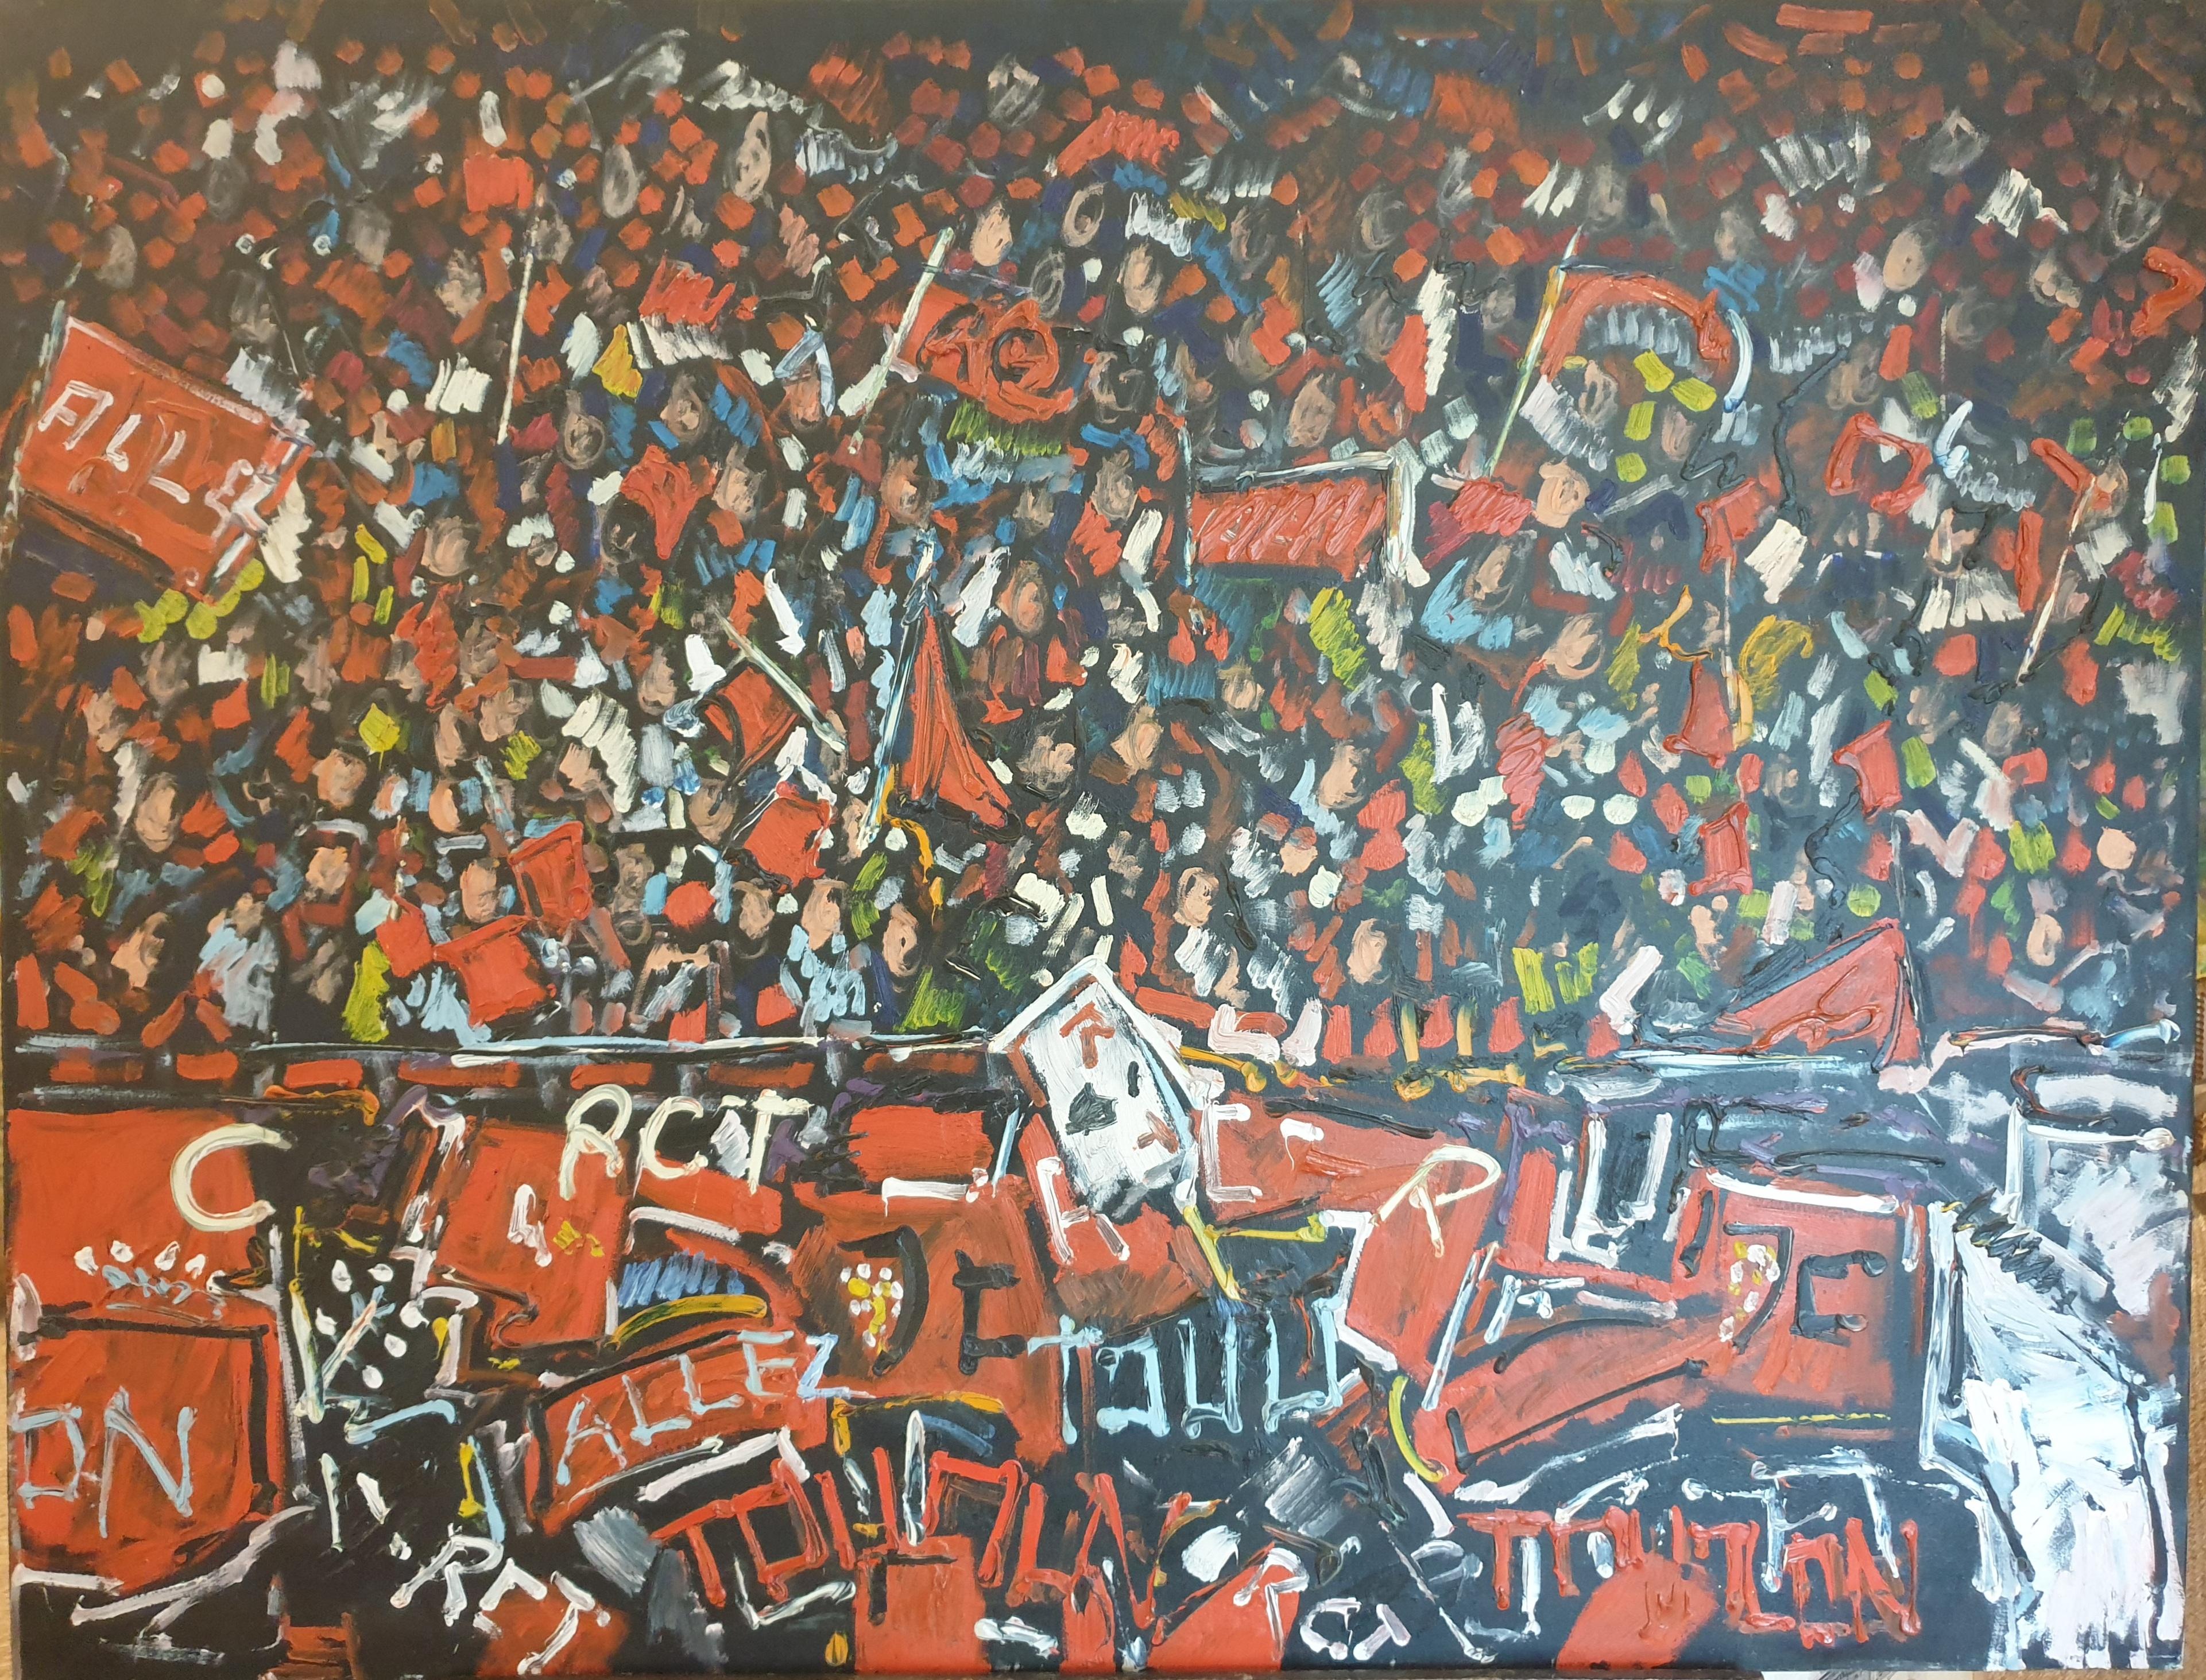 Unknown Abstract Painting - 'Allez!' At the Match. Toulon Rugby Club. Large Expressionist Oil on Canvas.